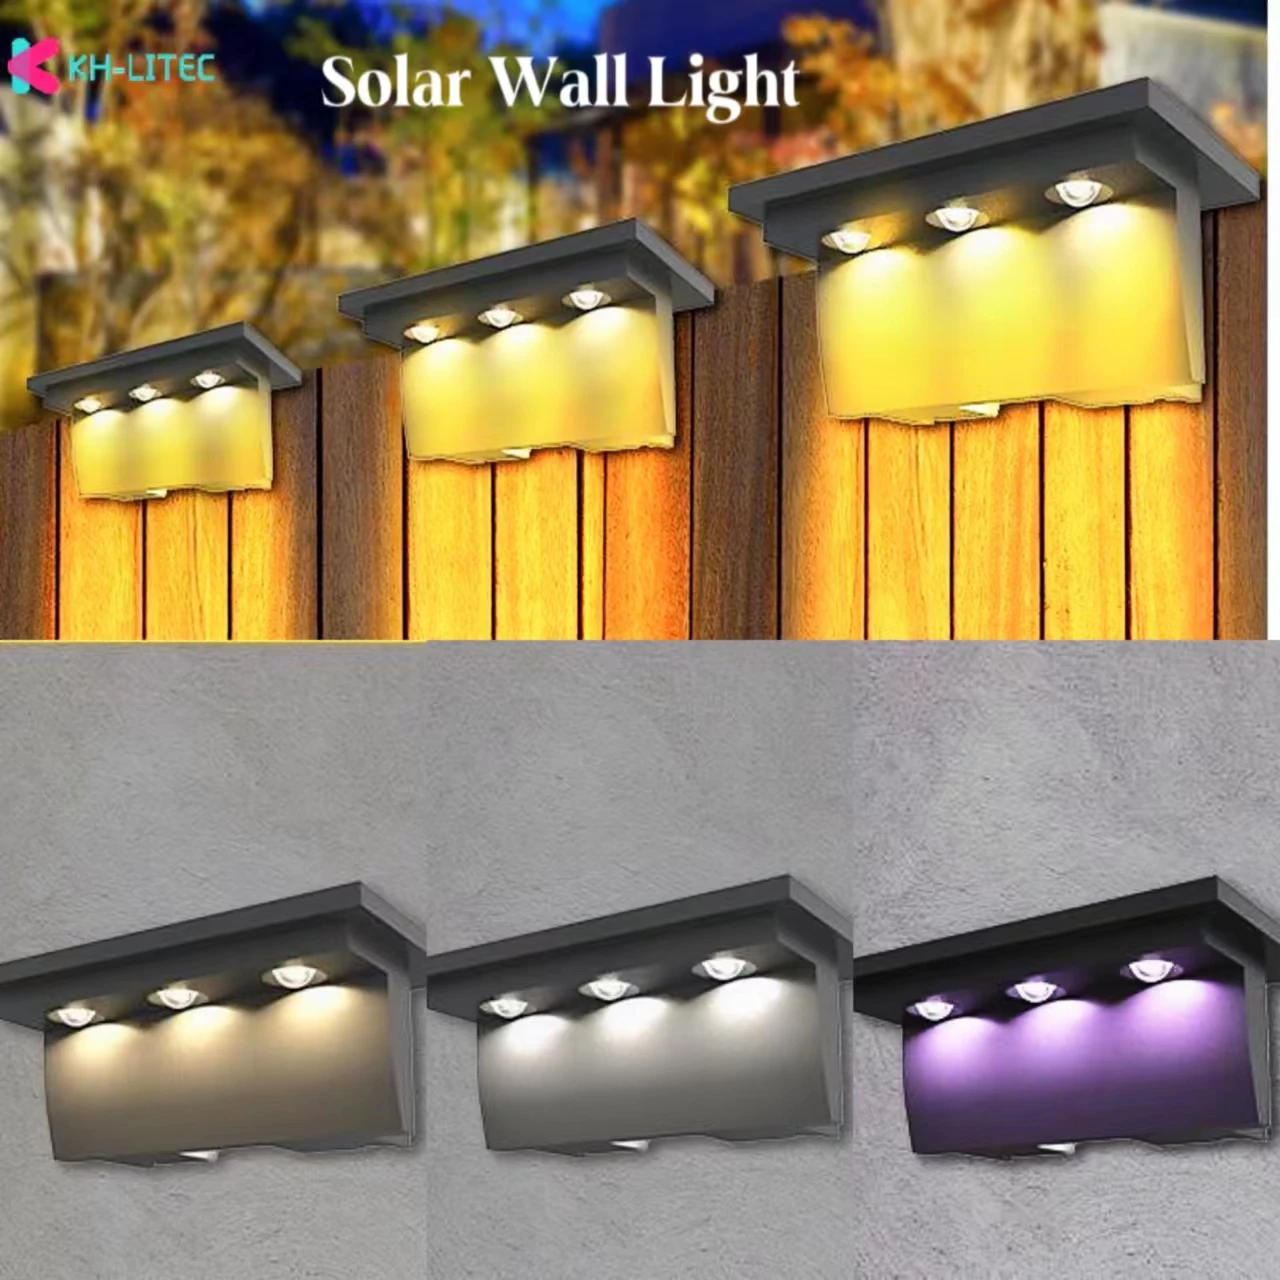 

Decoration Solar Garden Lights RGB Color Changing Waterproof Wall Lamp Christmas Gift Solar Lighting For Walkway Fence Stairs